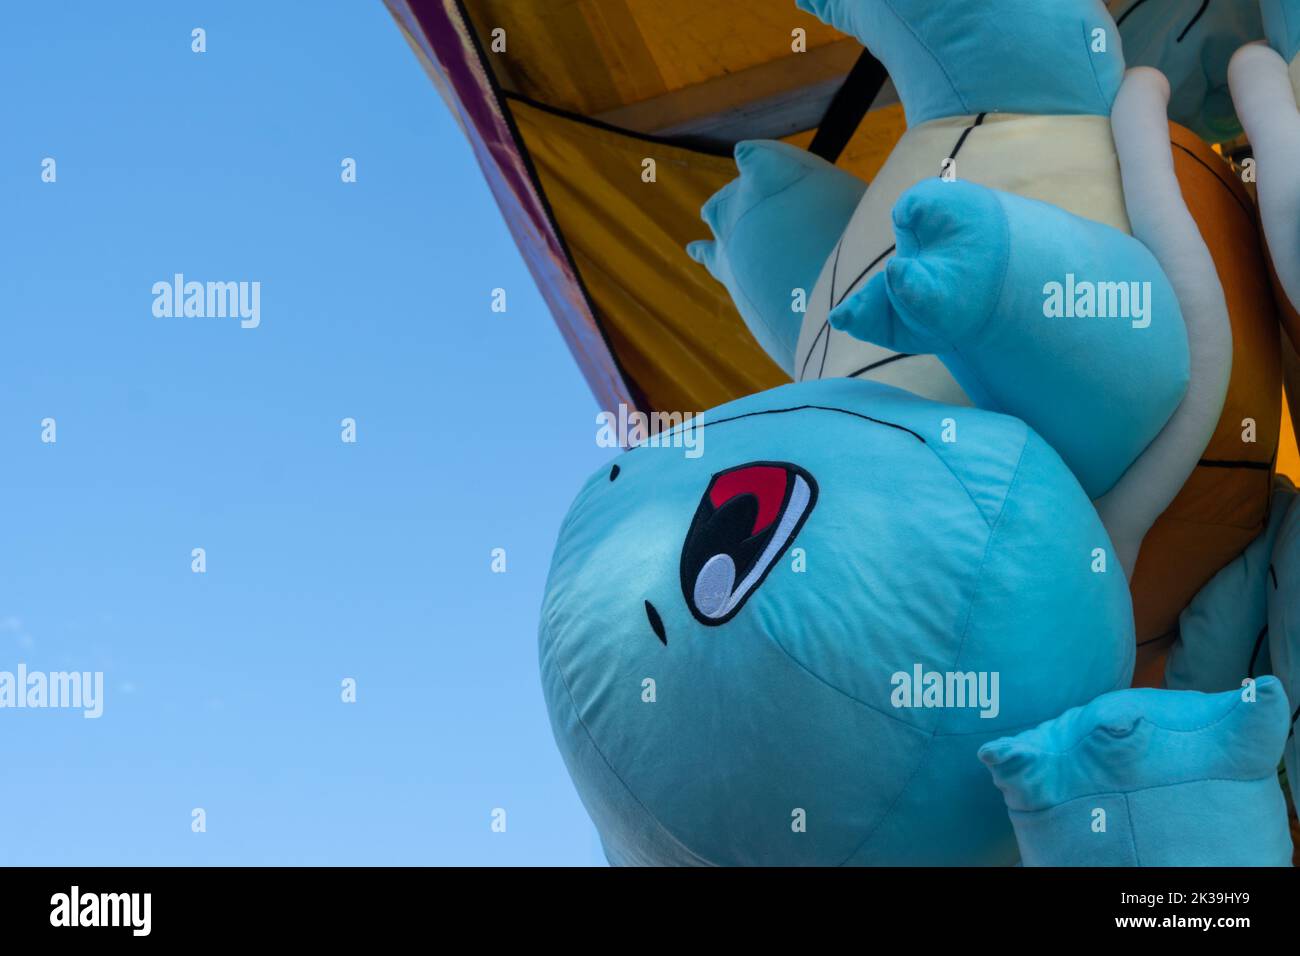 Calgary, Alberta, Canada - July 16, 2022: A Squirtle pokemon stuffed plush toy offered as a prize for winning a carnival game, shown hanging upside do Stock Photo